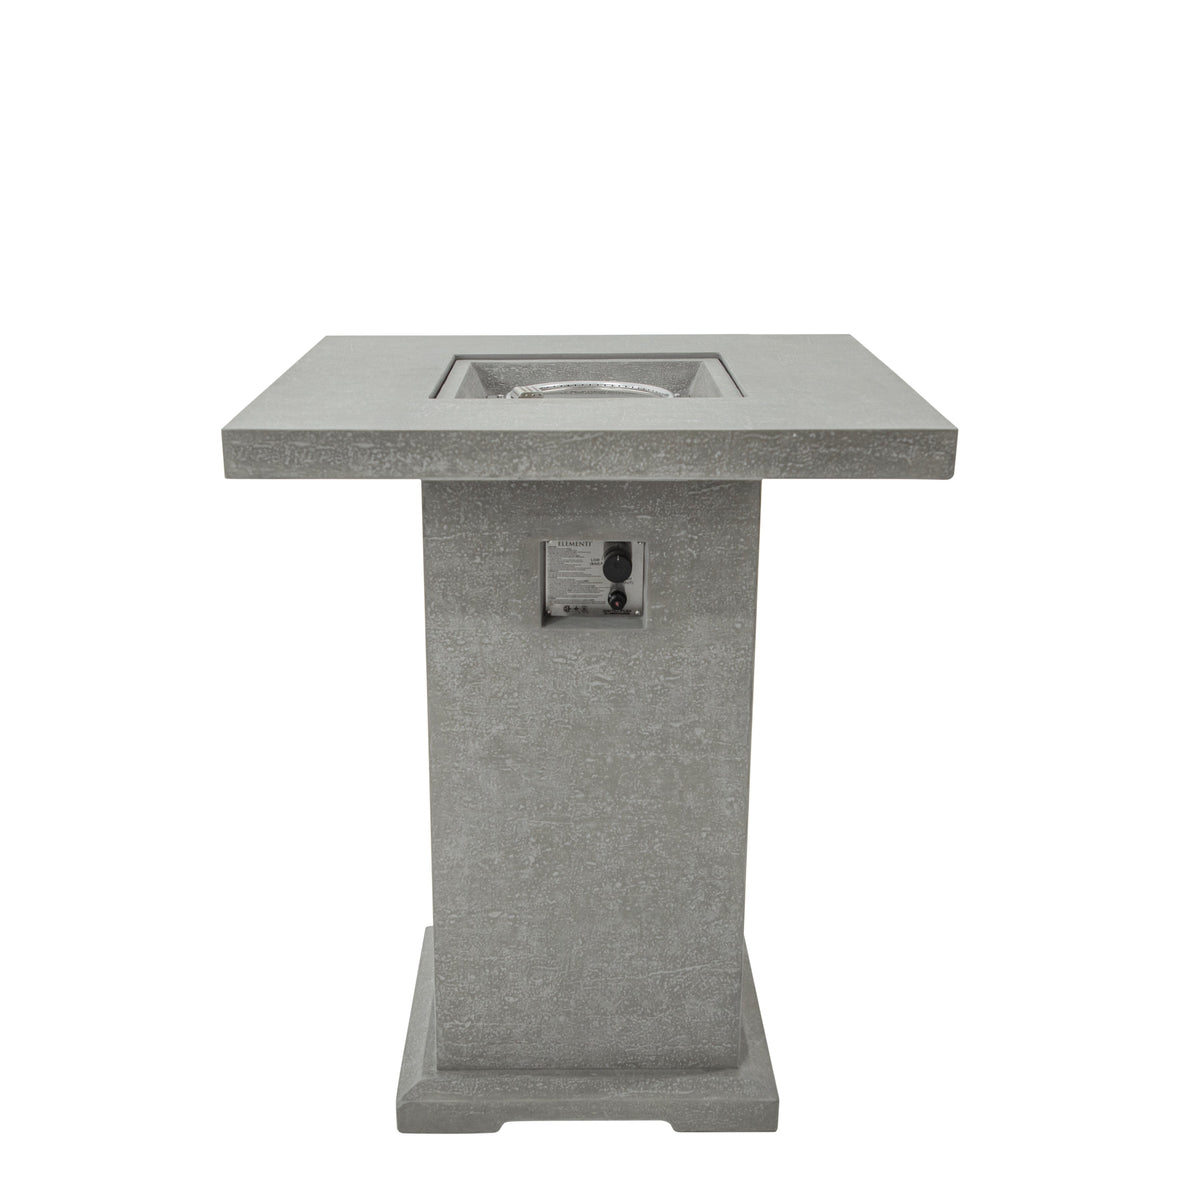 Elementi Montreal Bar Table in Light Gray without lava rocks